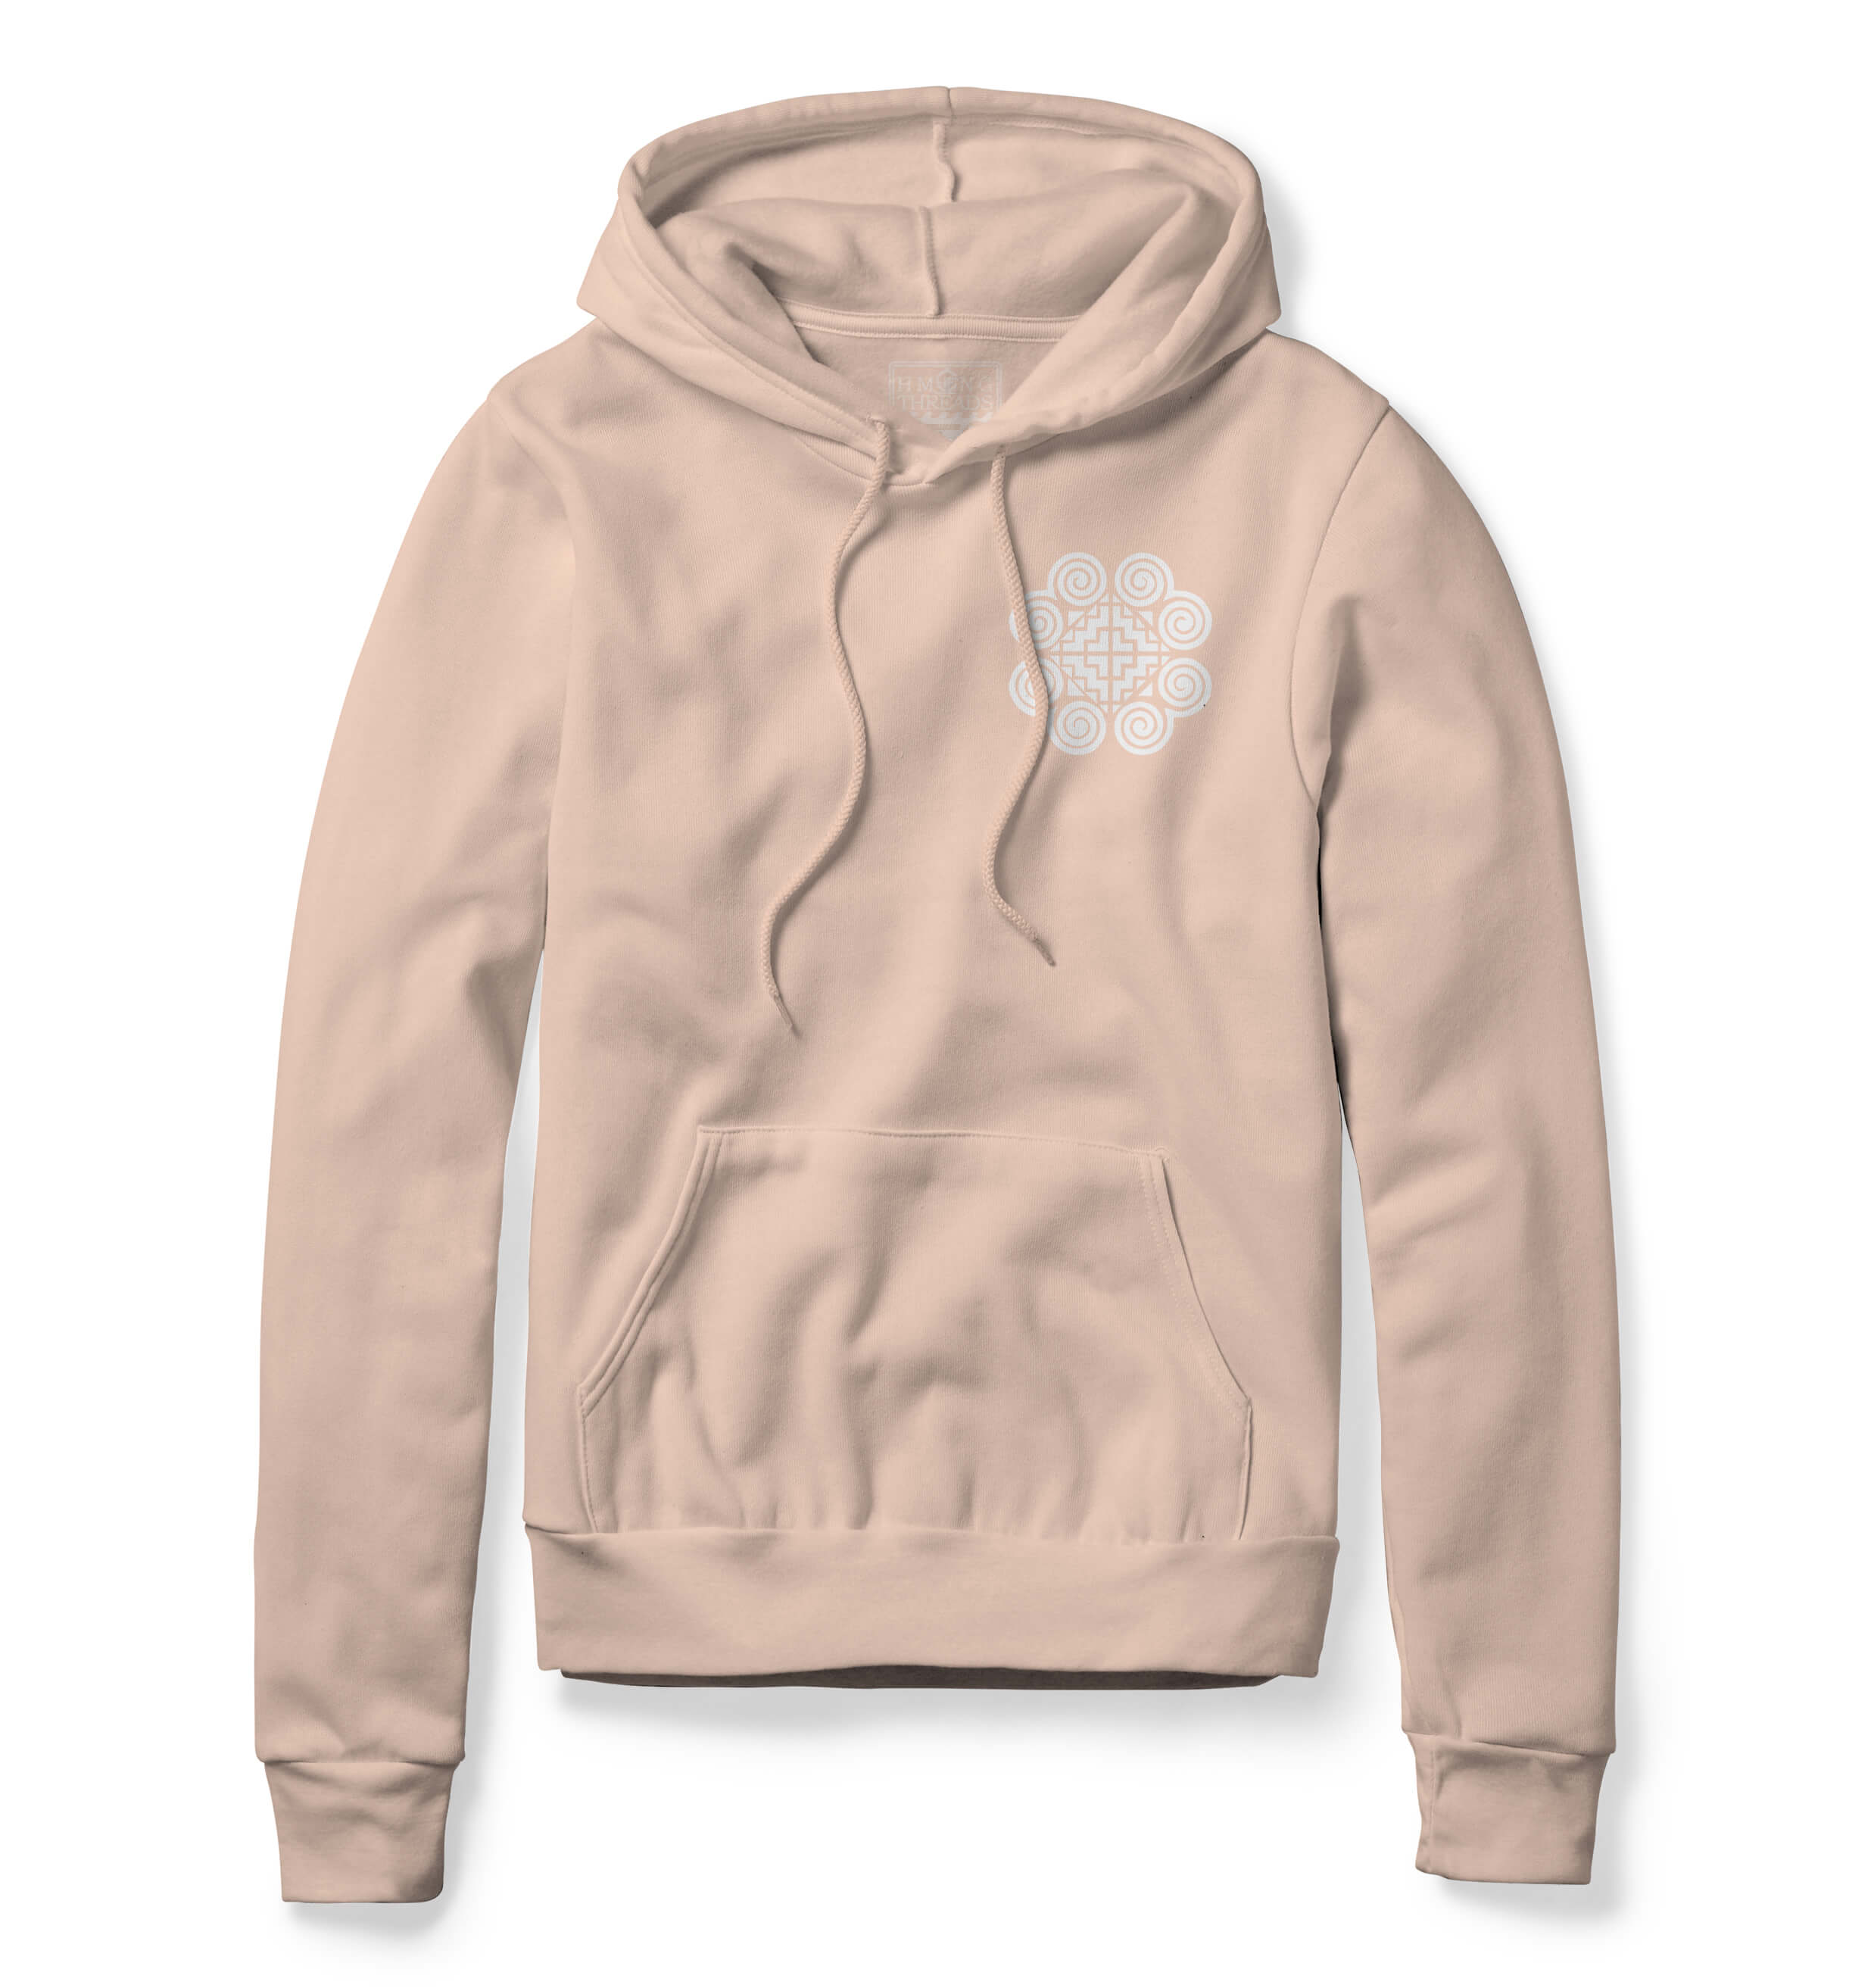 HMONG EMBROIDERY CHEST SOFT PINK UNISEX HOODIE